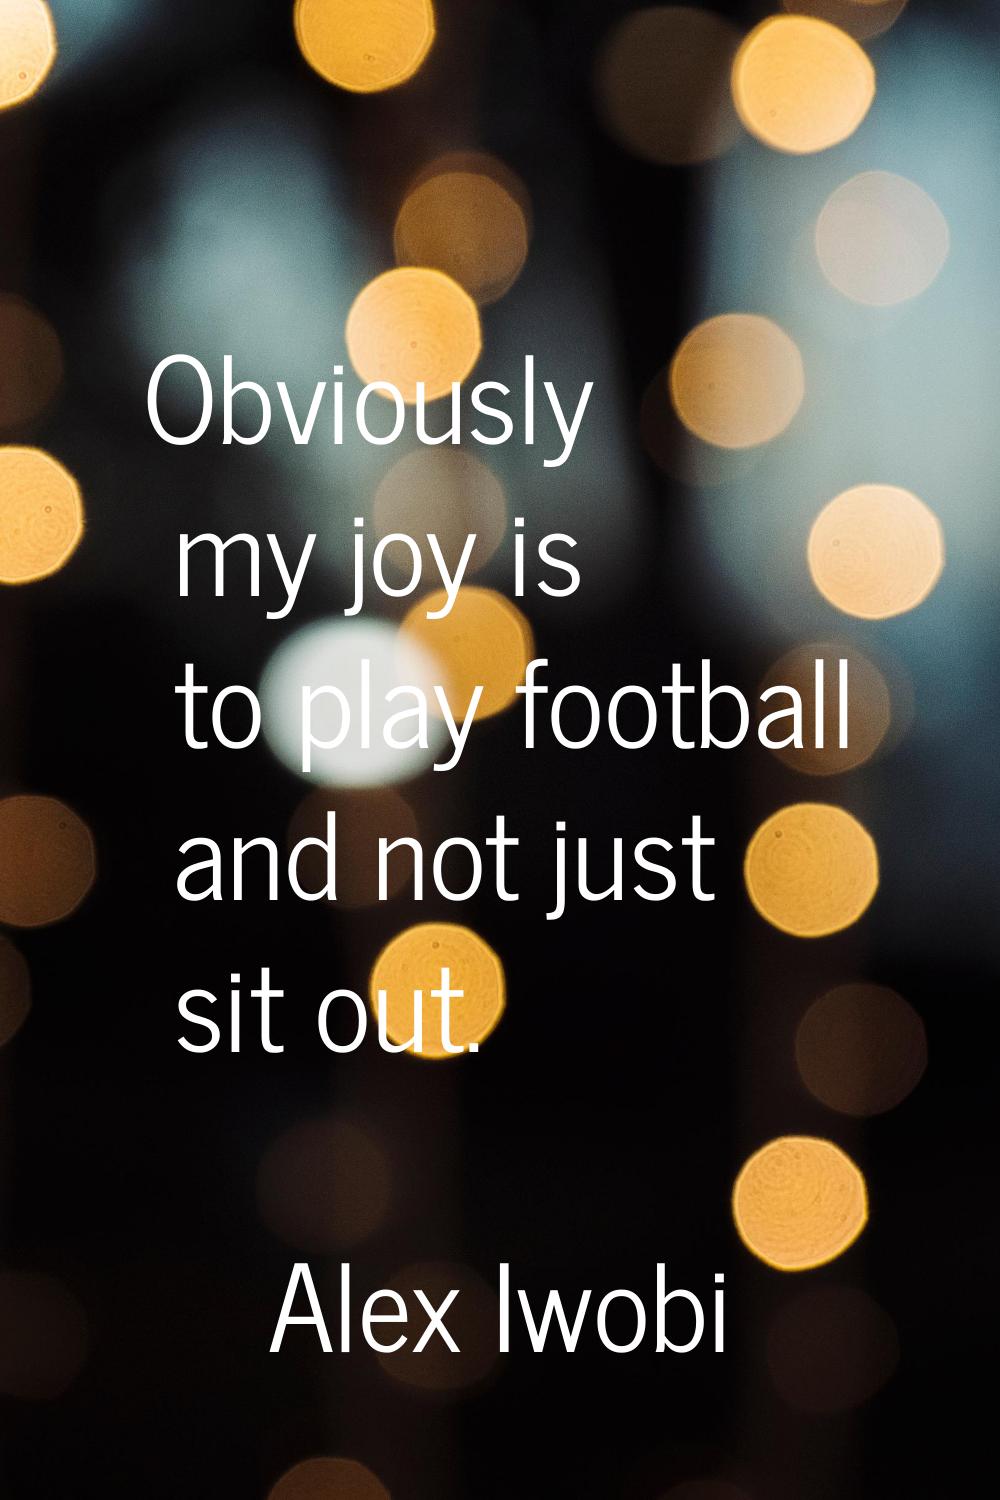 Obviously my joy is to play football and not just sit out.